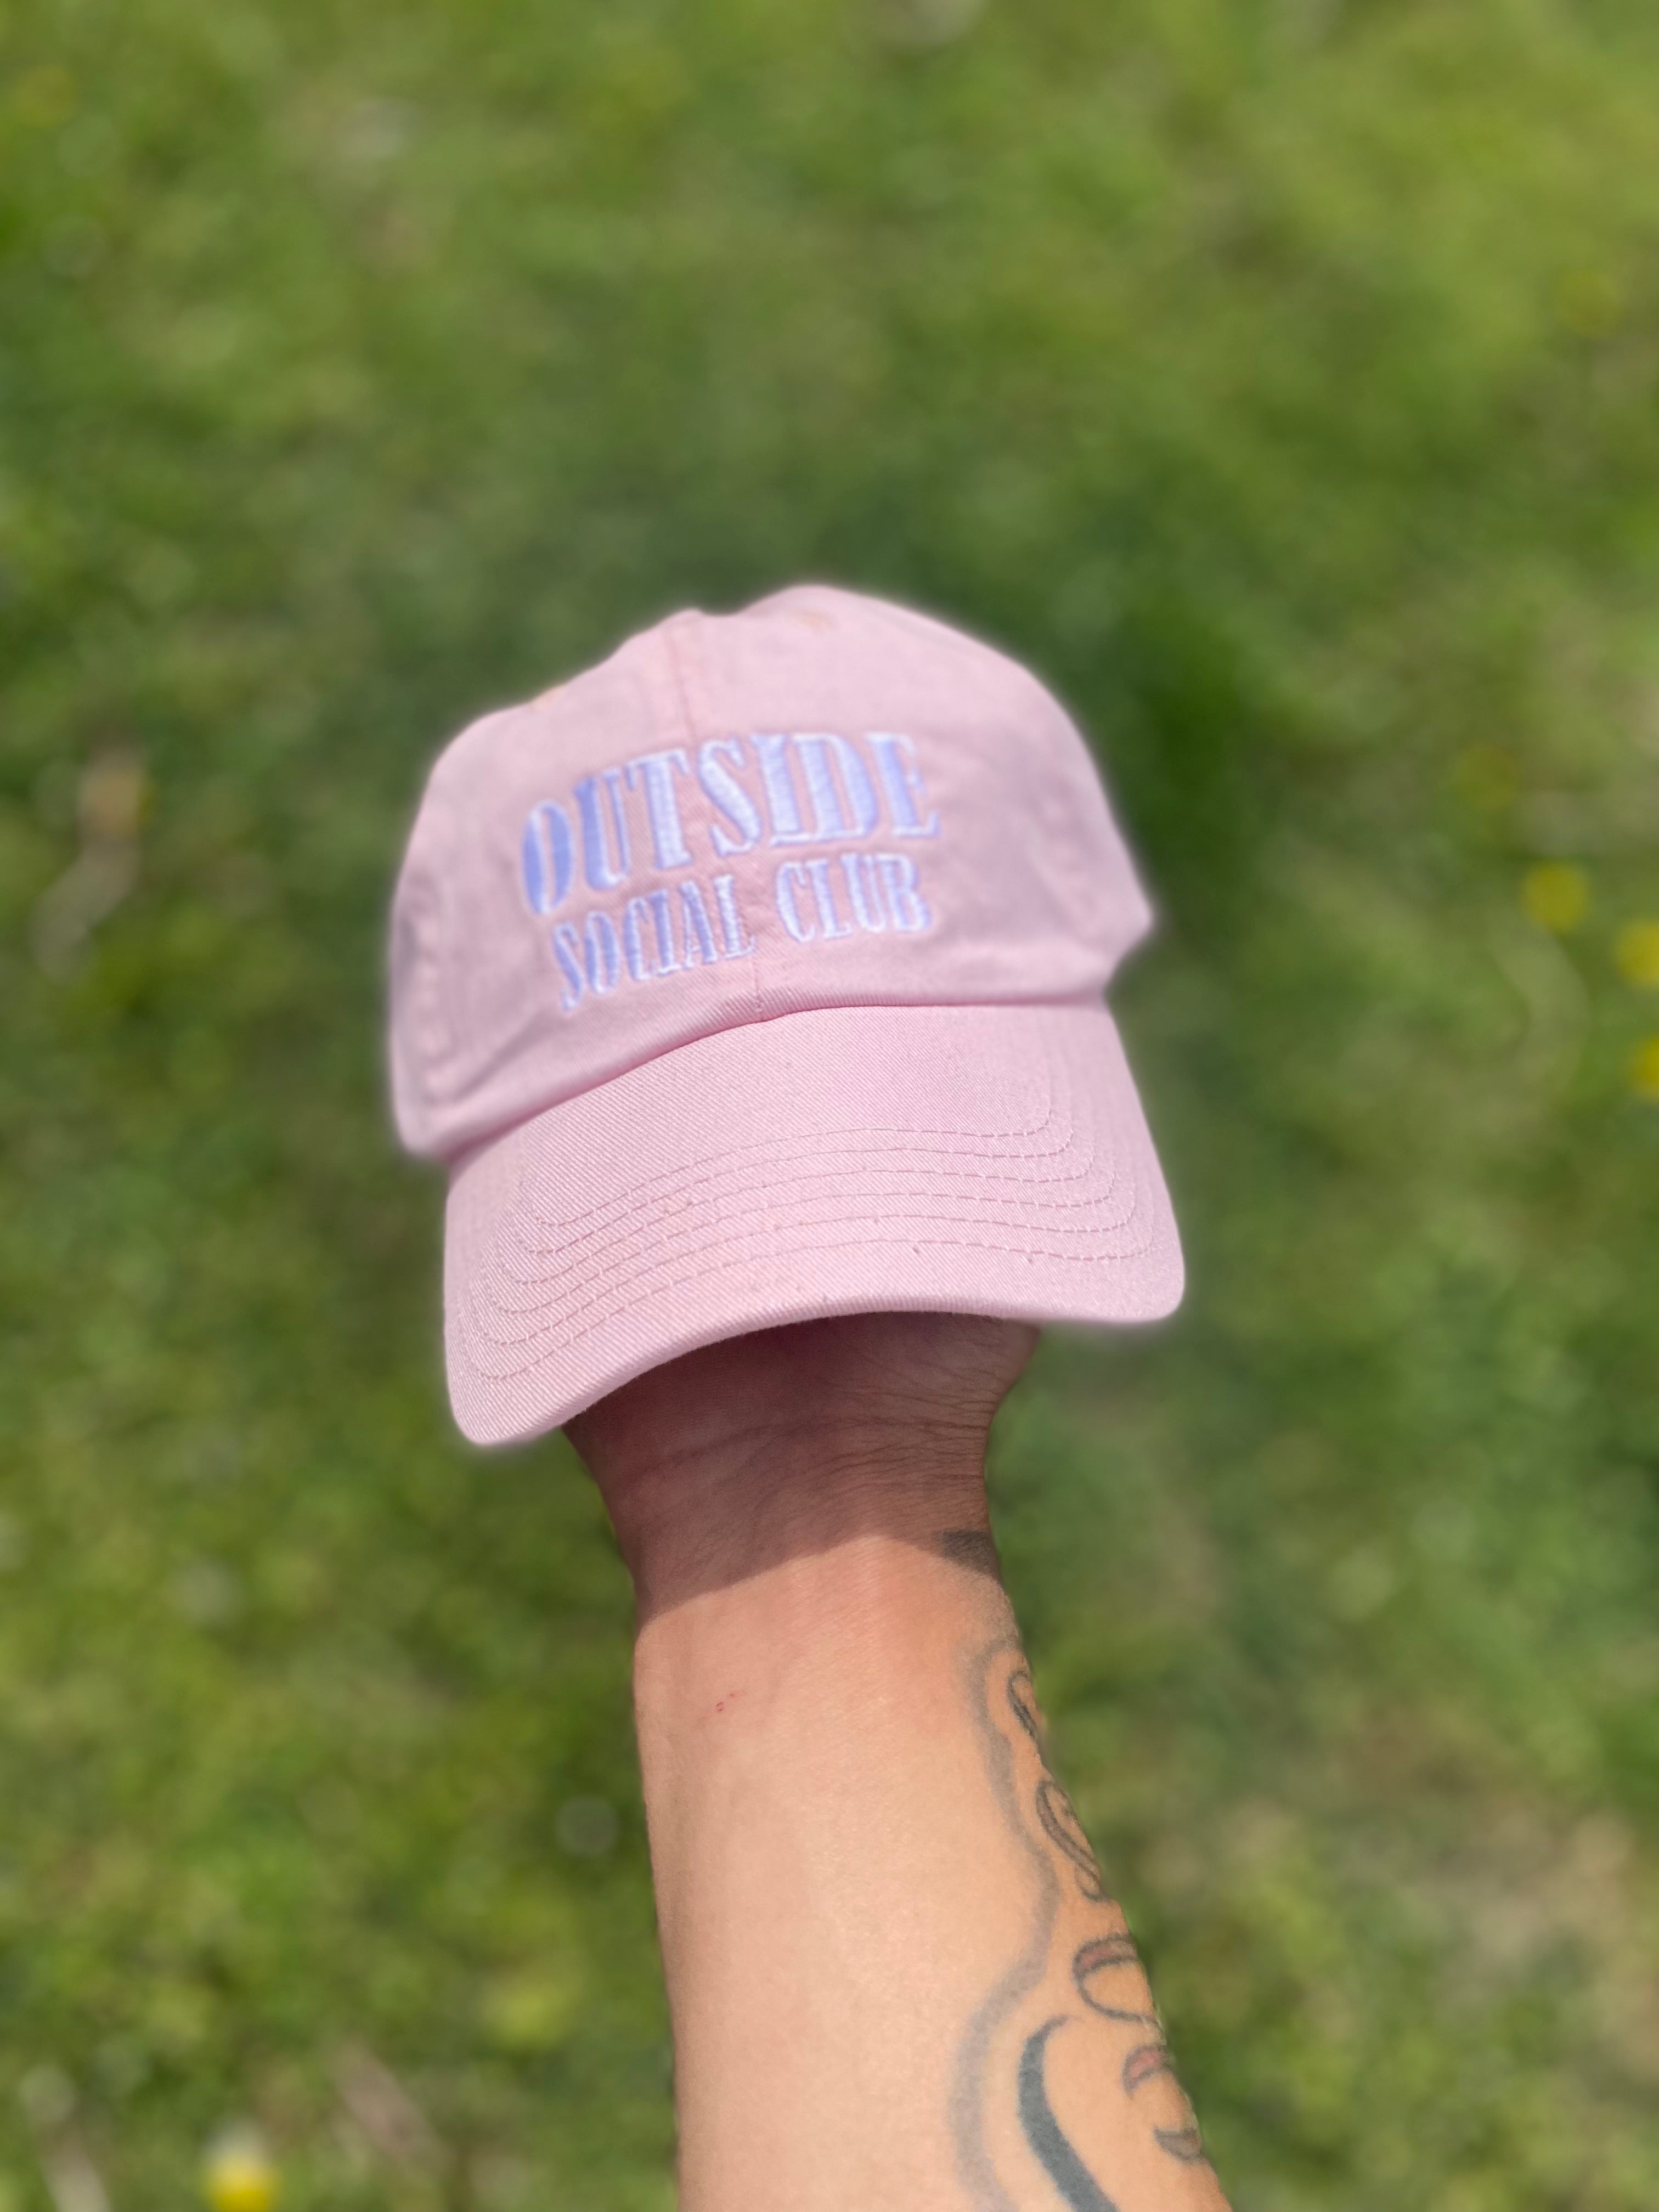 Pink curved bill "Member's only" hat